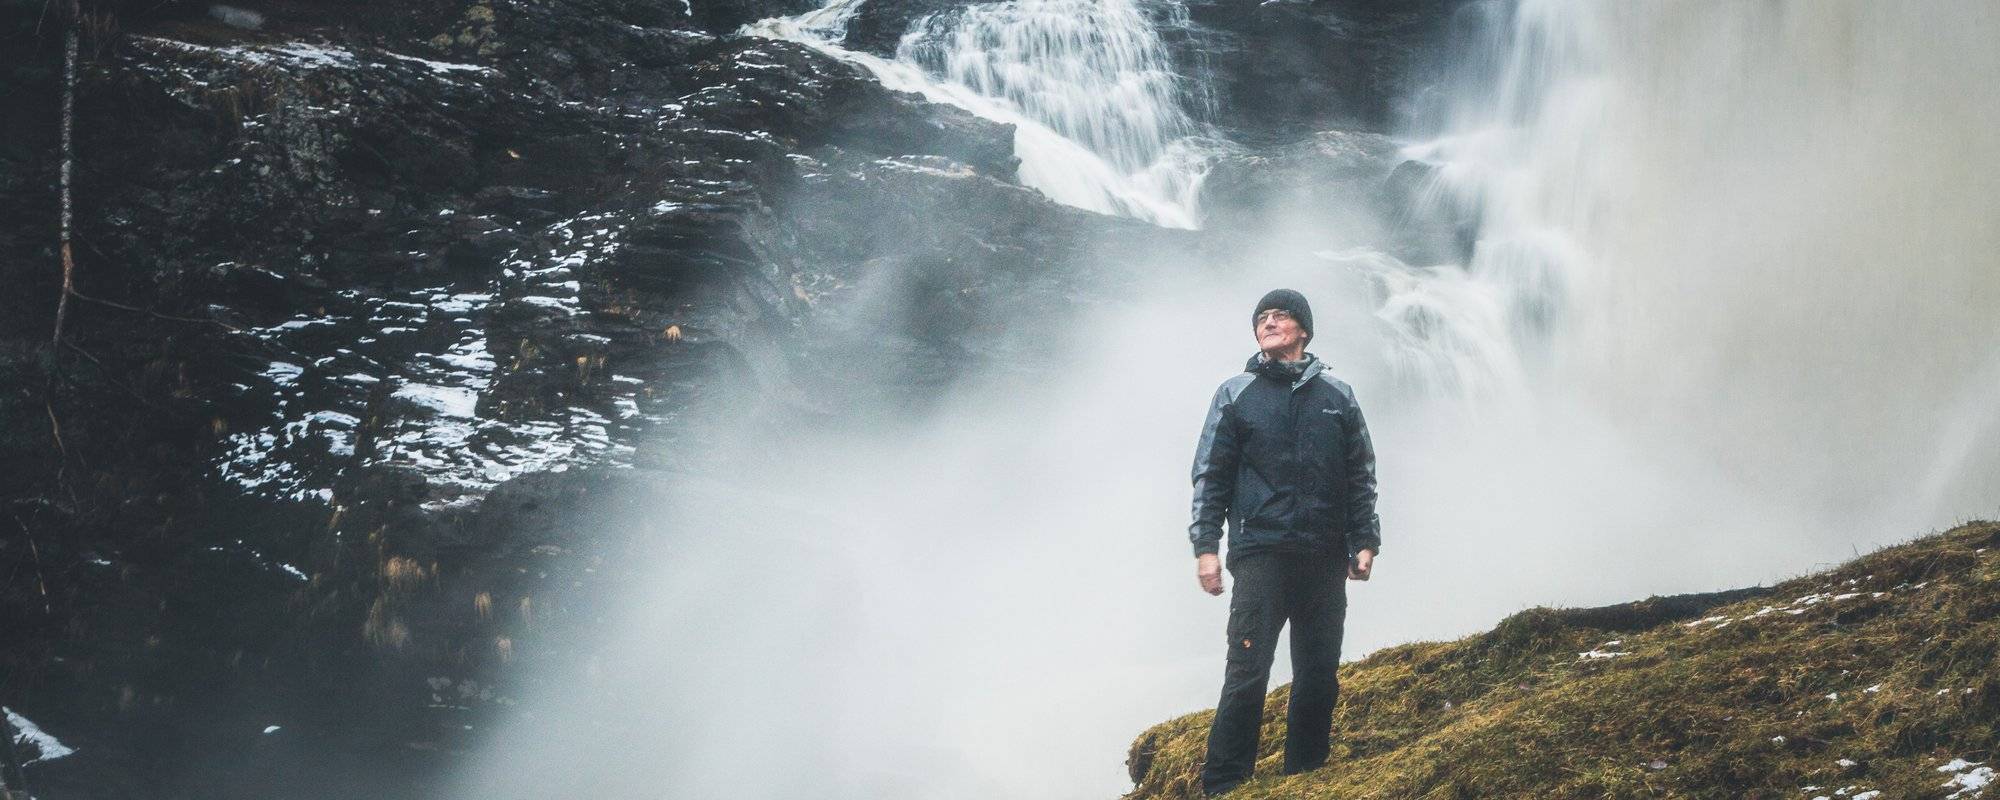 Norwegian travels: Exploring outdoors with my father, three waterfalls in dark day.